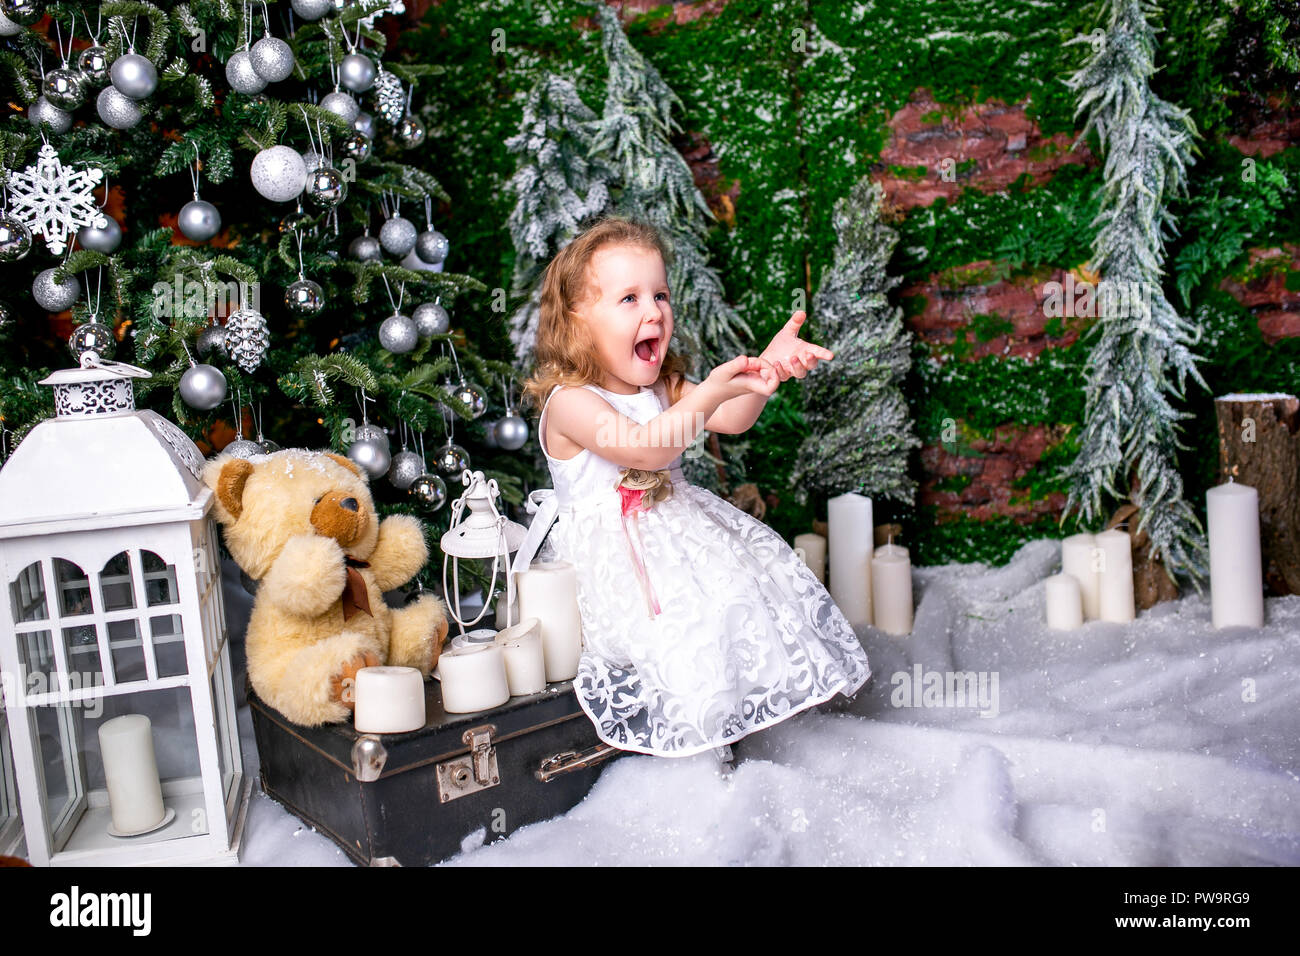 cute little girl in a white dress sitting near a Christmas tree on a suitcase next to the candles and a teddy bear, throws snow up and laughs Stock Photo